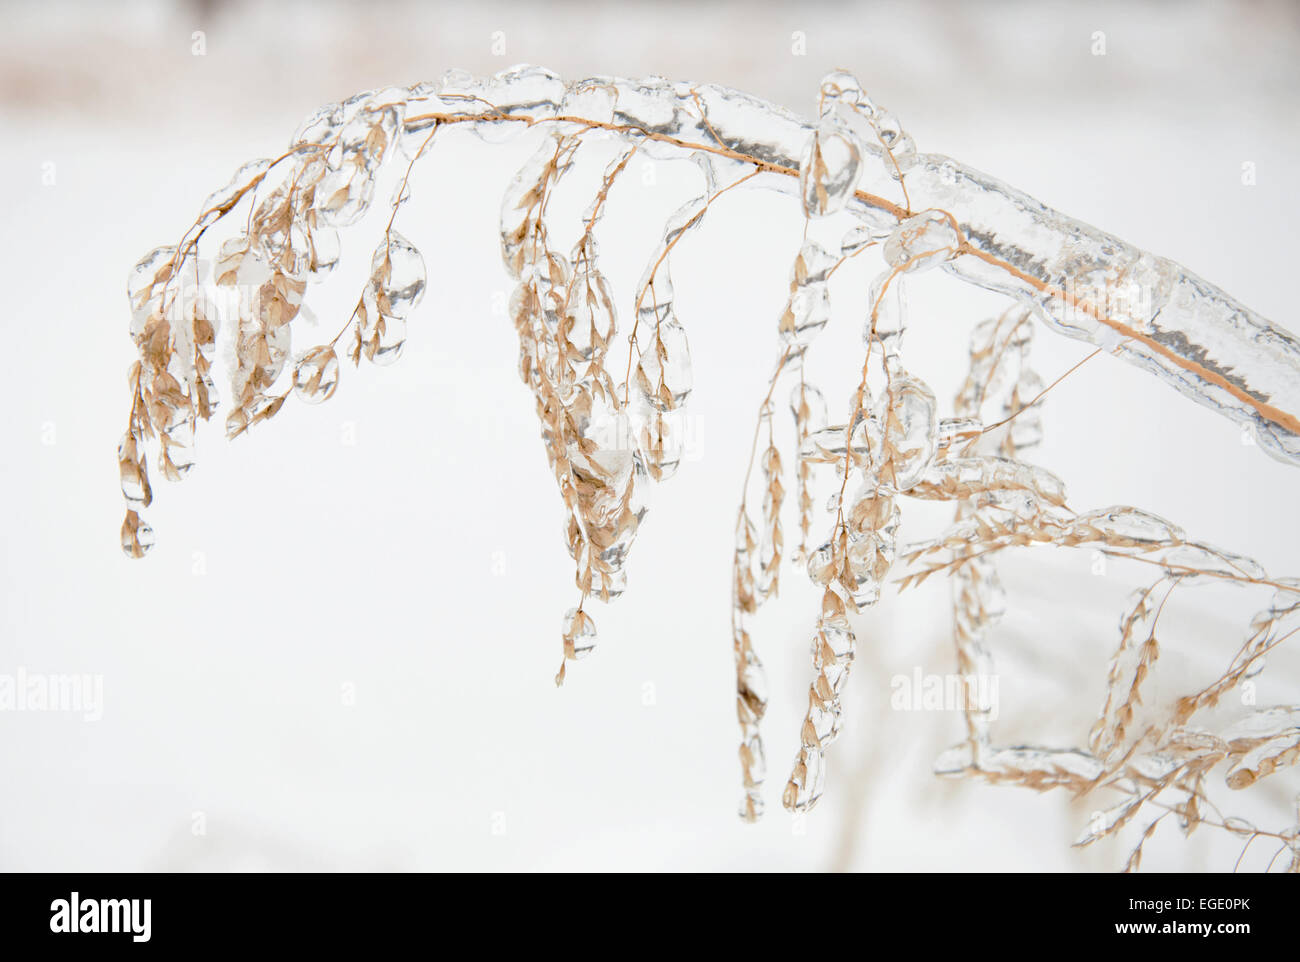 Wild oats covered in a thick layer of ice after an ice storm Stock Photo